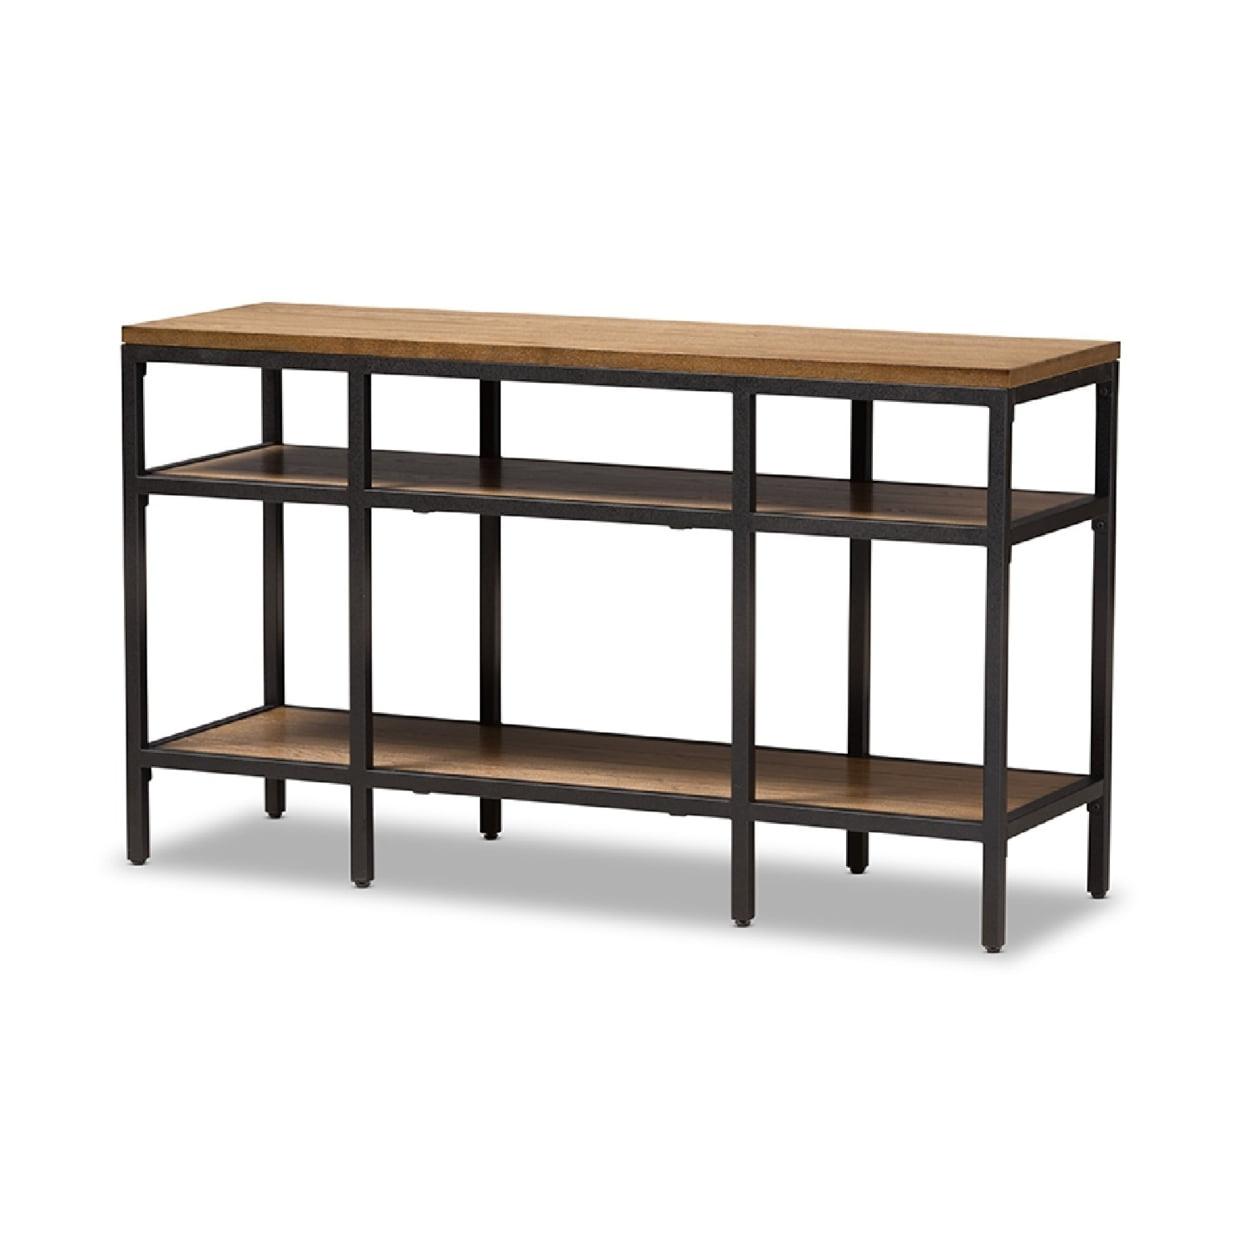 Caribou Oak Brown and Black Metal Rustic Industrial Console Table with Storage